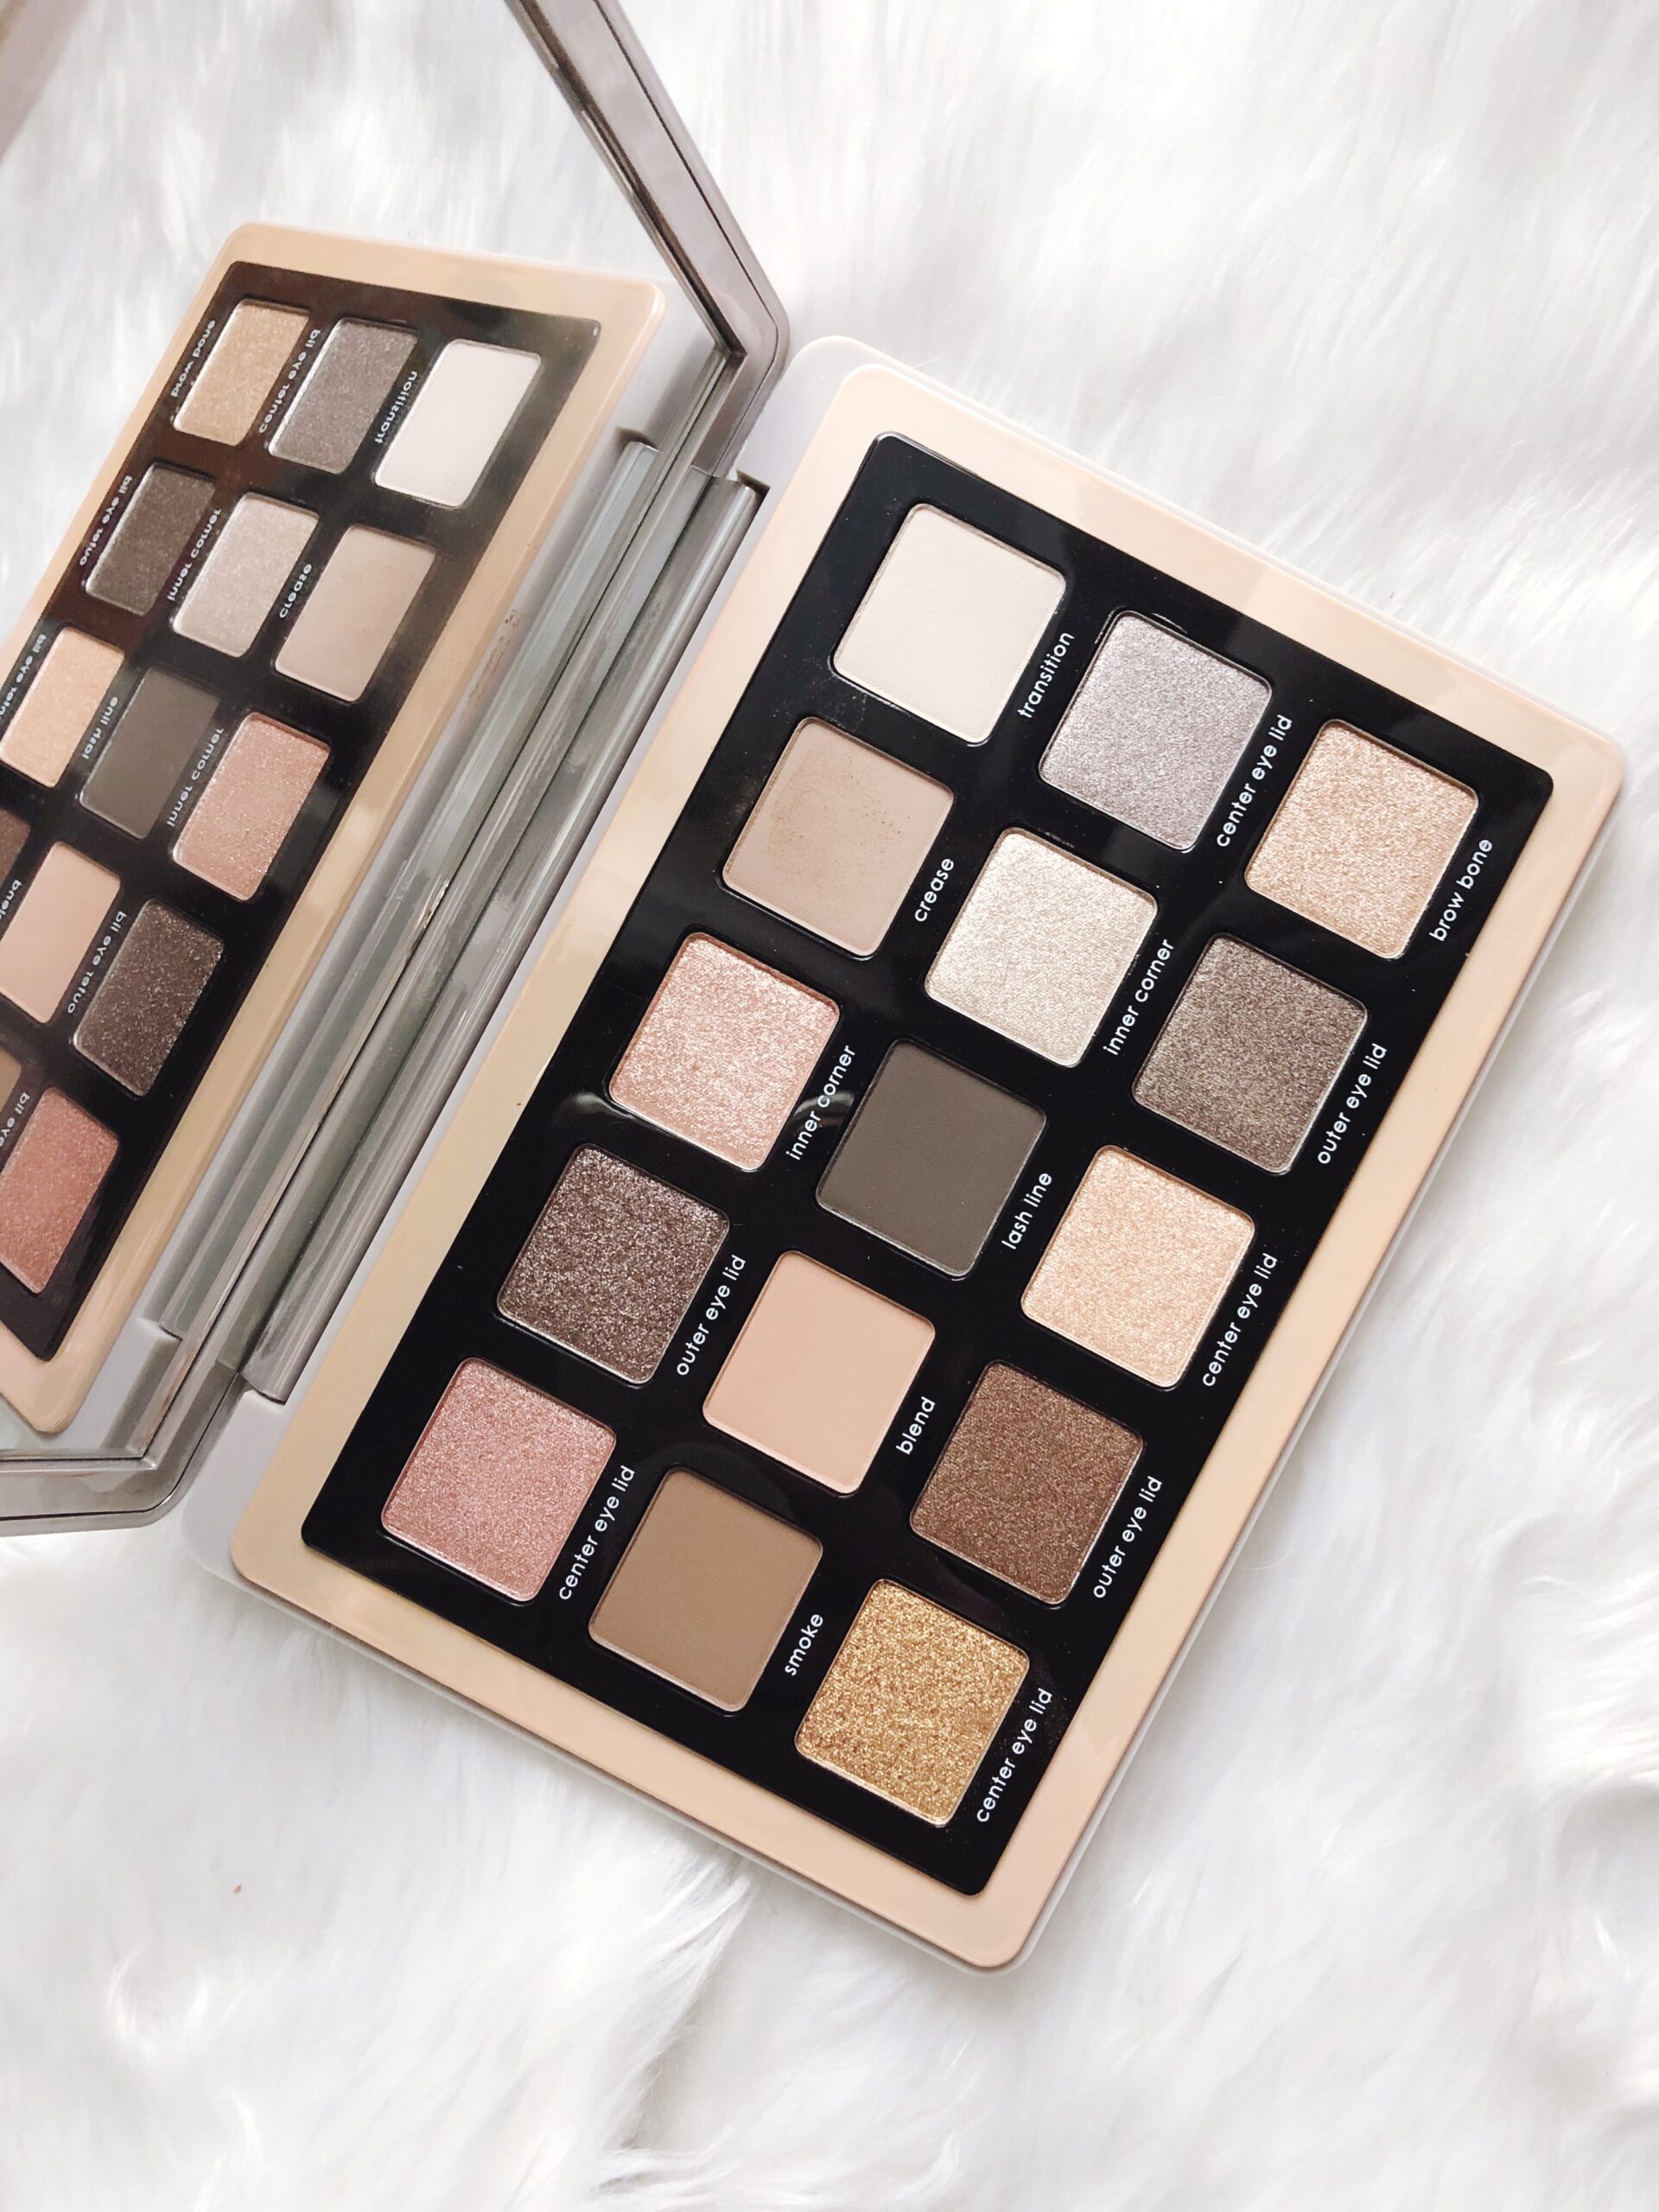 Natasha Denona Glam Palette Review + Swatches featured by top MD beauty blogger, The Beauty Minimalist